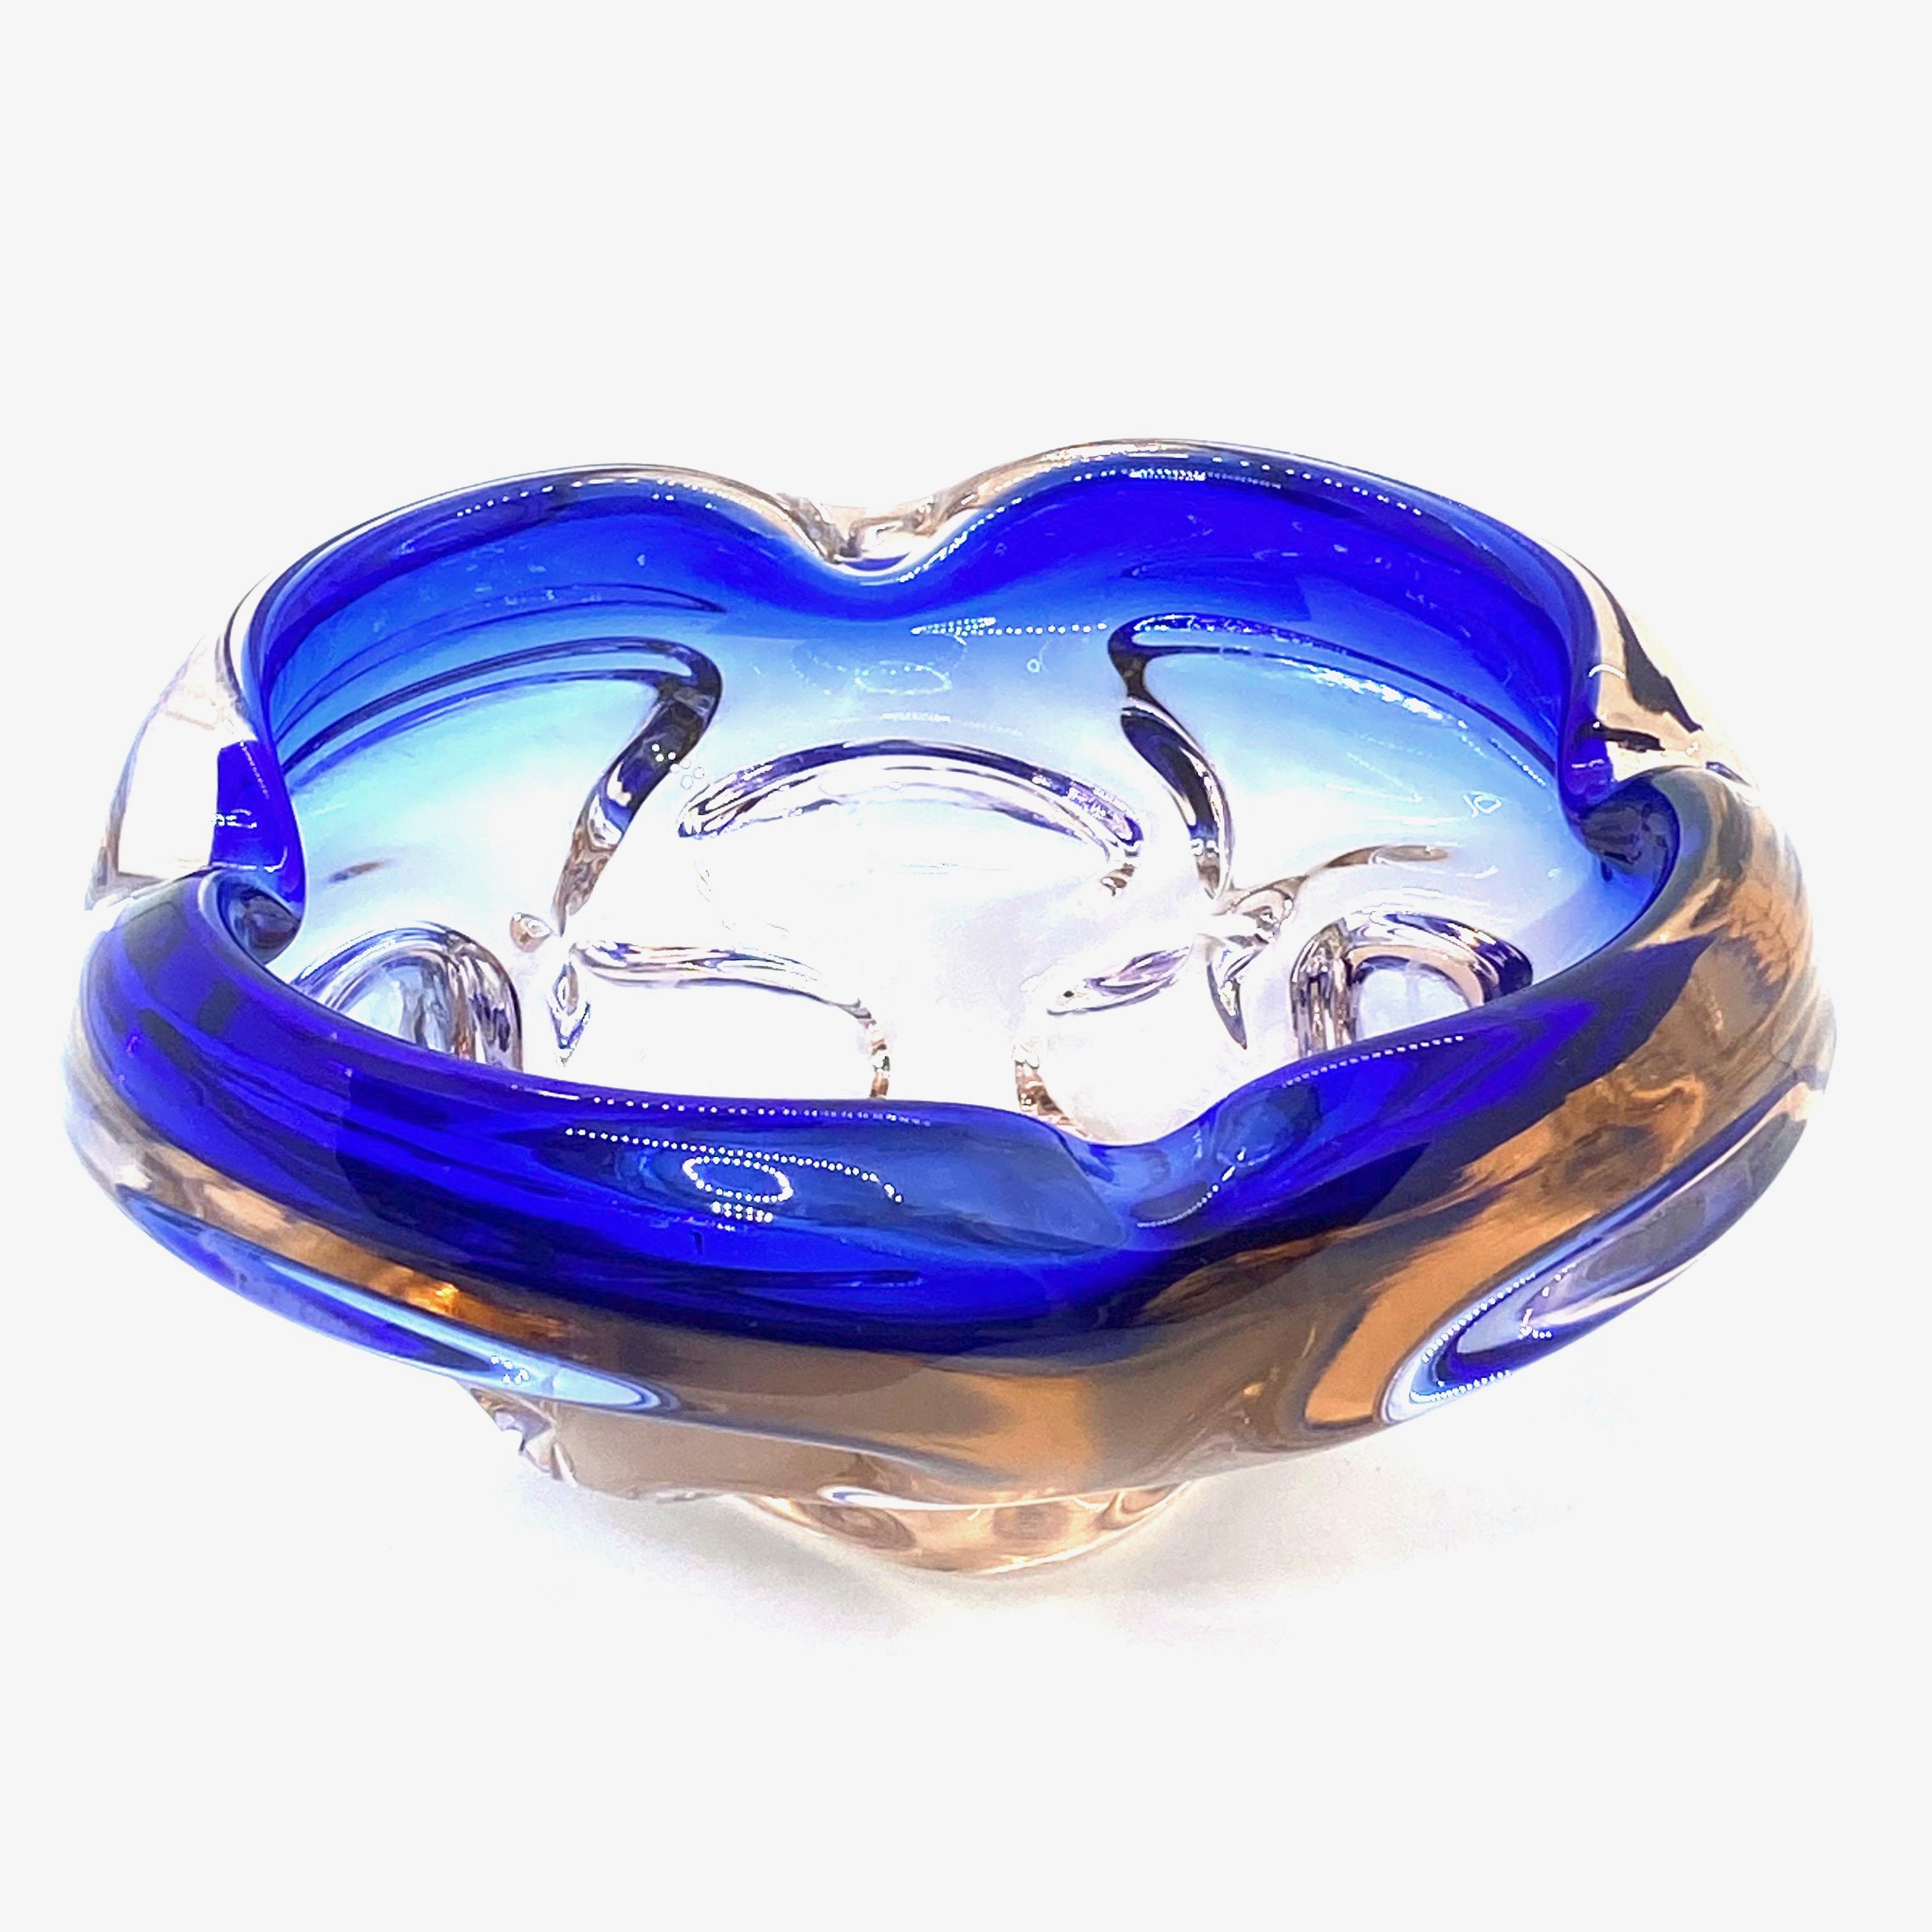 Italian Murano Art Glass Bowl Catchall roségold and blue, Vintage, Italy, 1970s For Sale